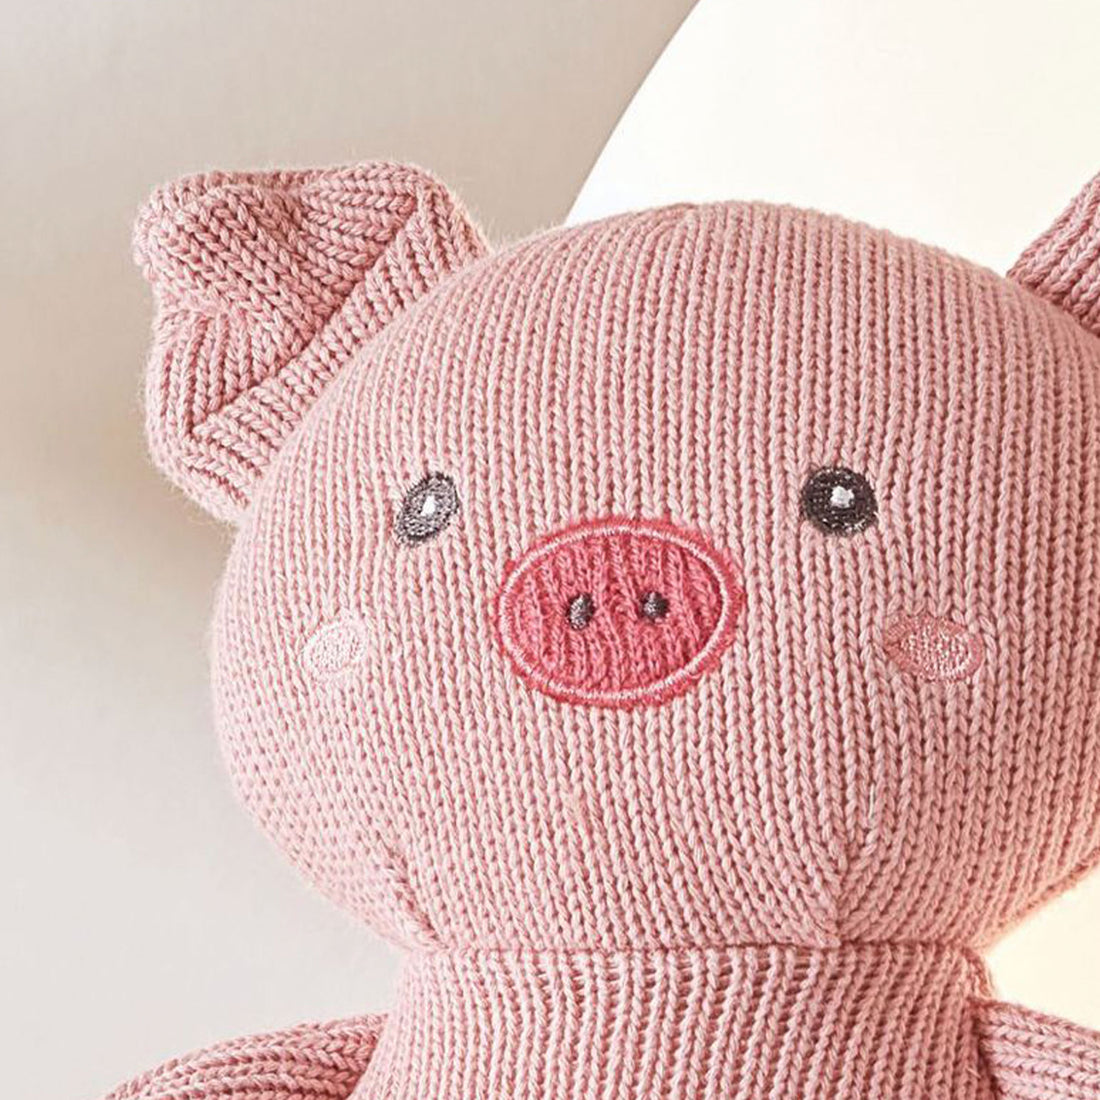 A close-up photo of a pink knitted pig with embroidered eyes and a stitched smile. The pig has a curly tail and small hooves.